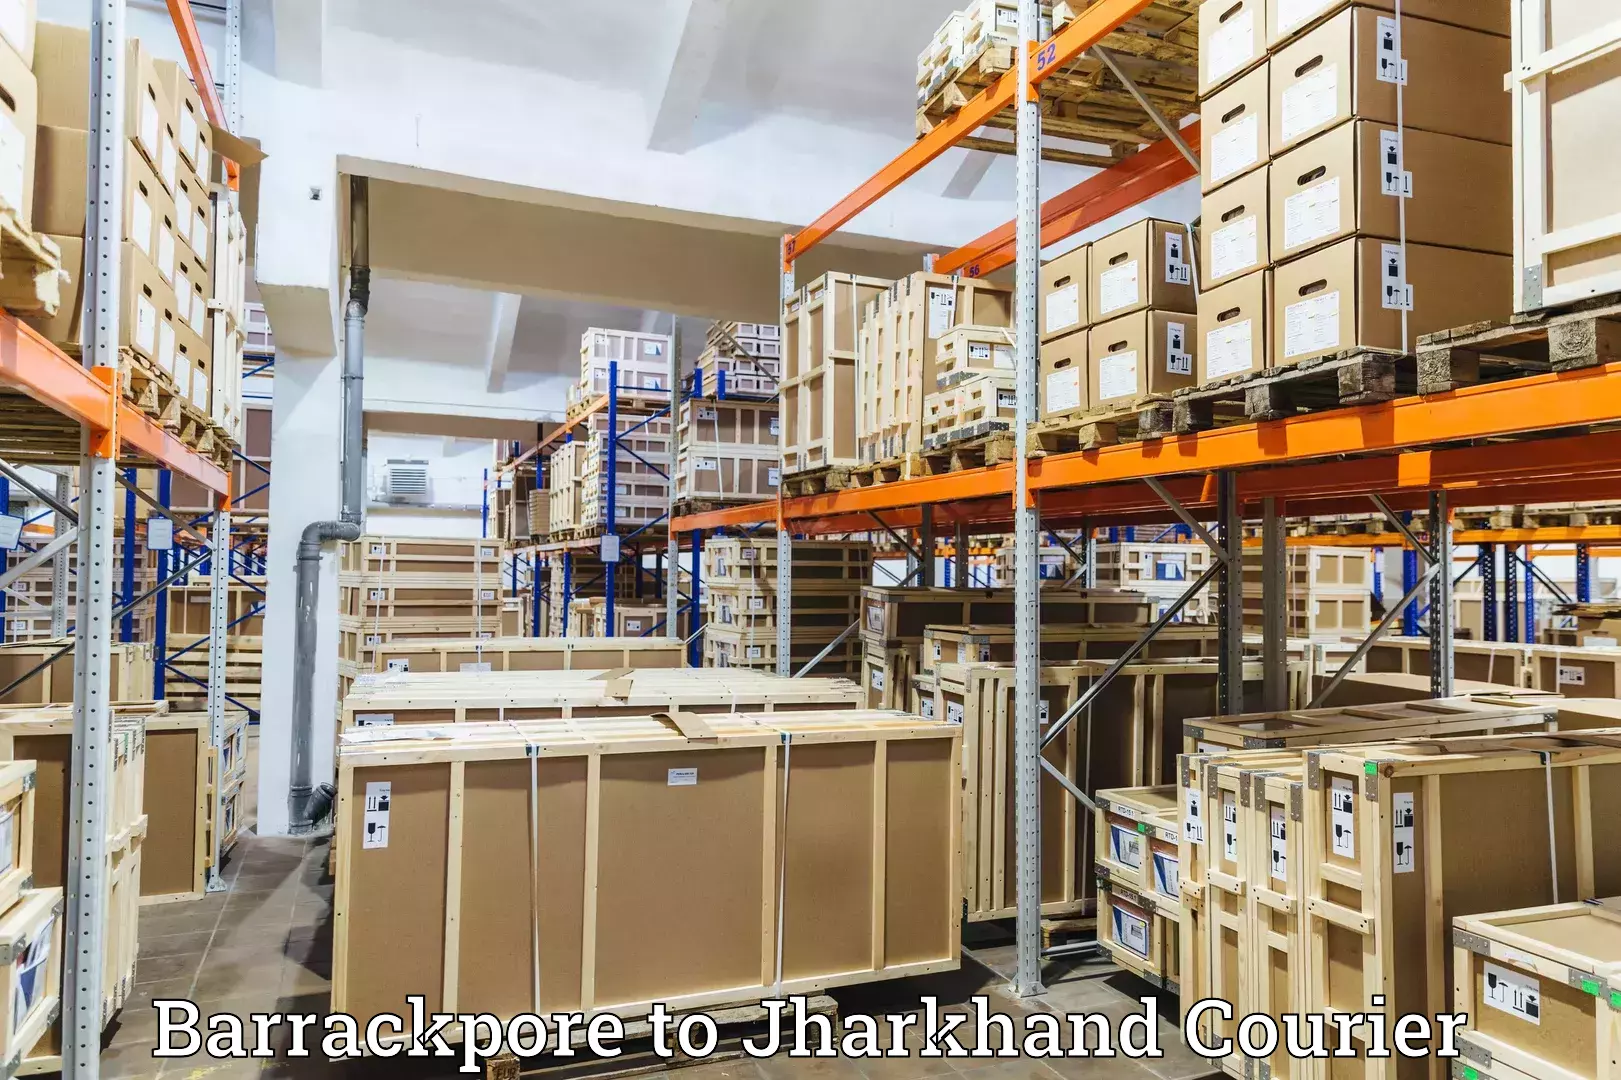 Seamless shipping experience in Barrackpore to Noamundi